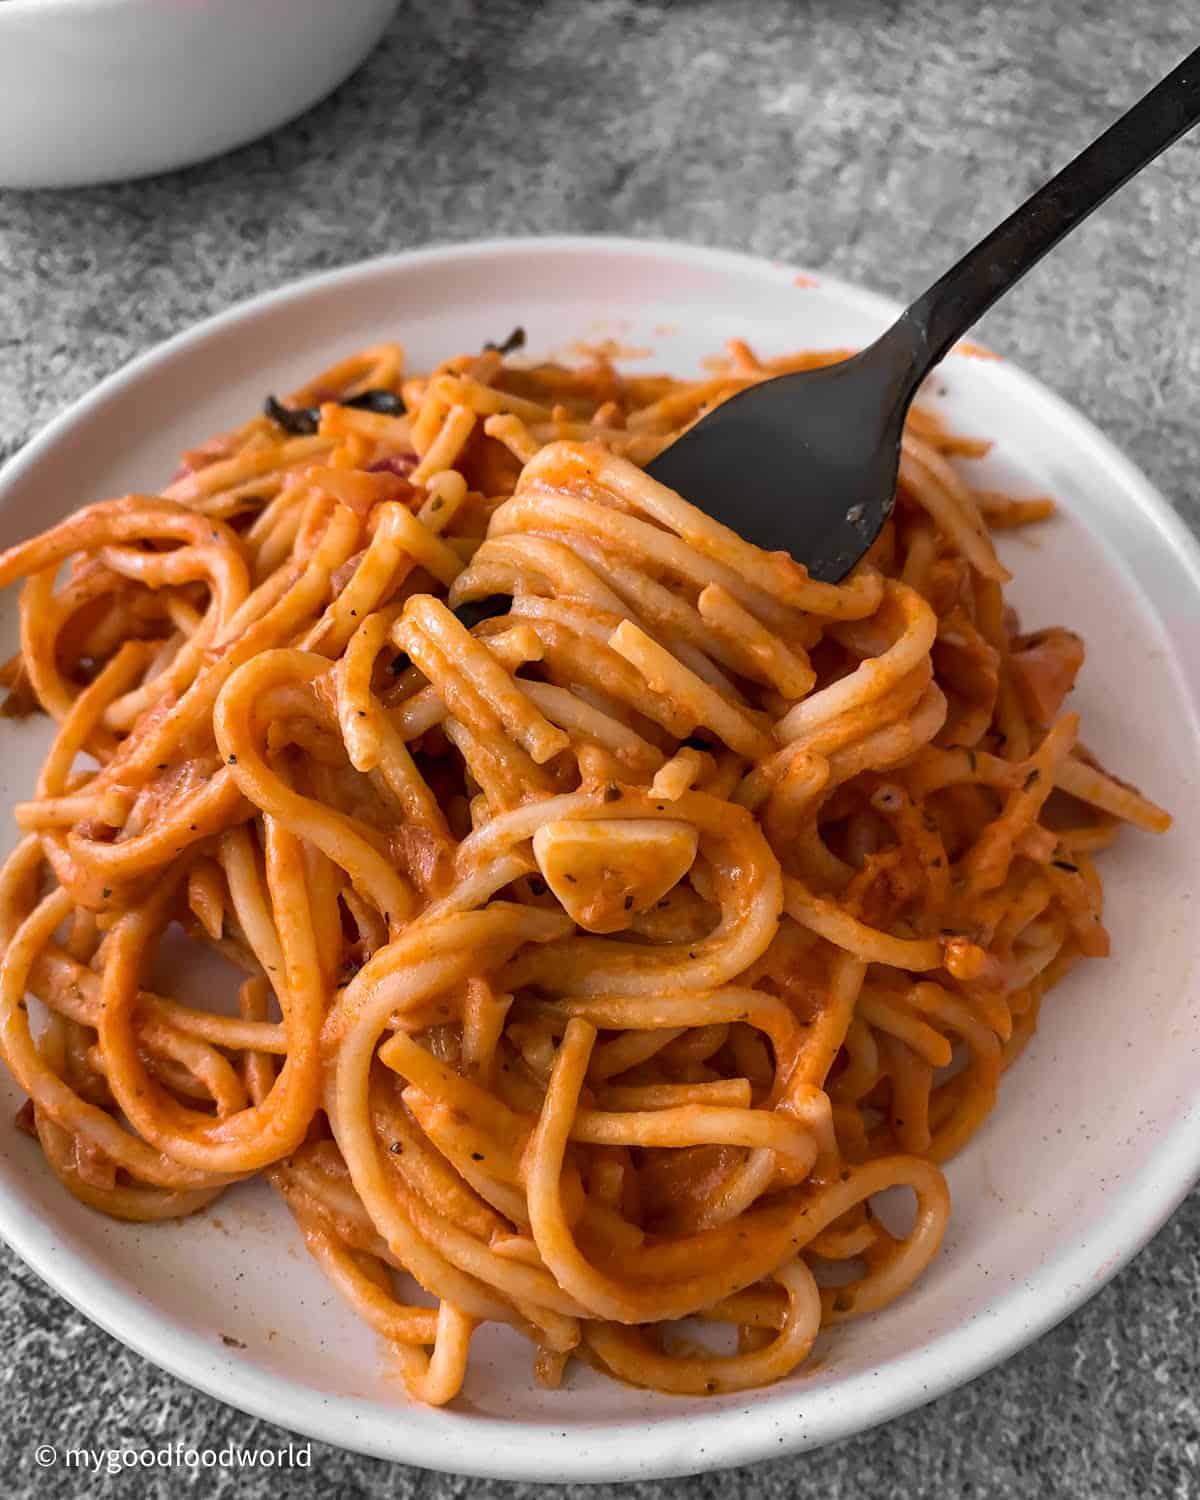 Creamy tomato sauce coated spaghetti pasta that has been served in a white round plate is being scooped with a black colored fork.